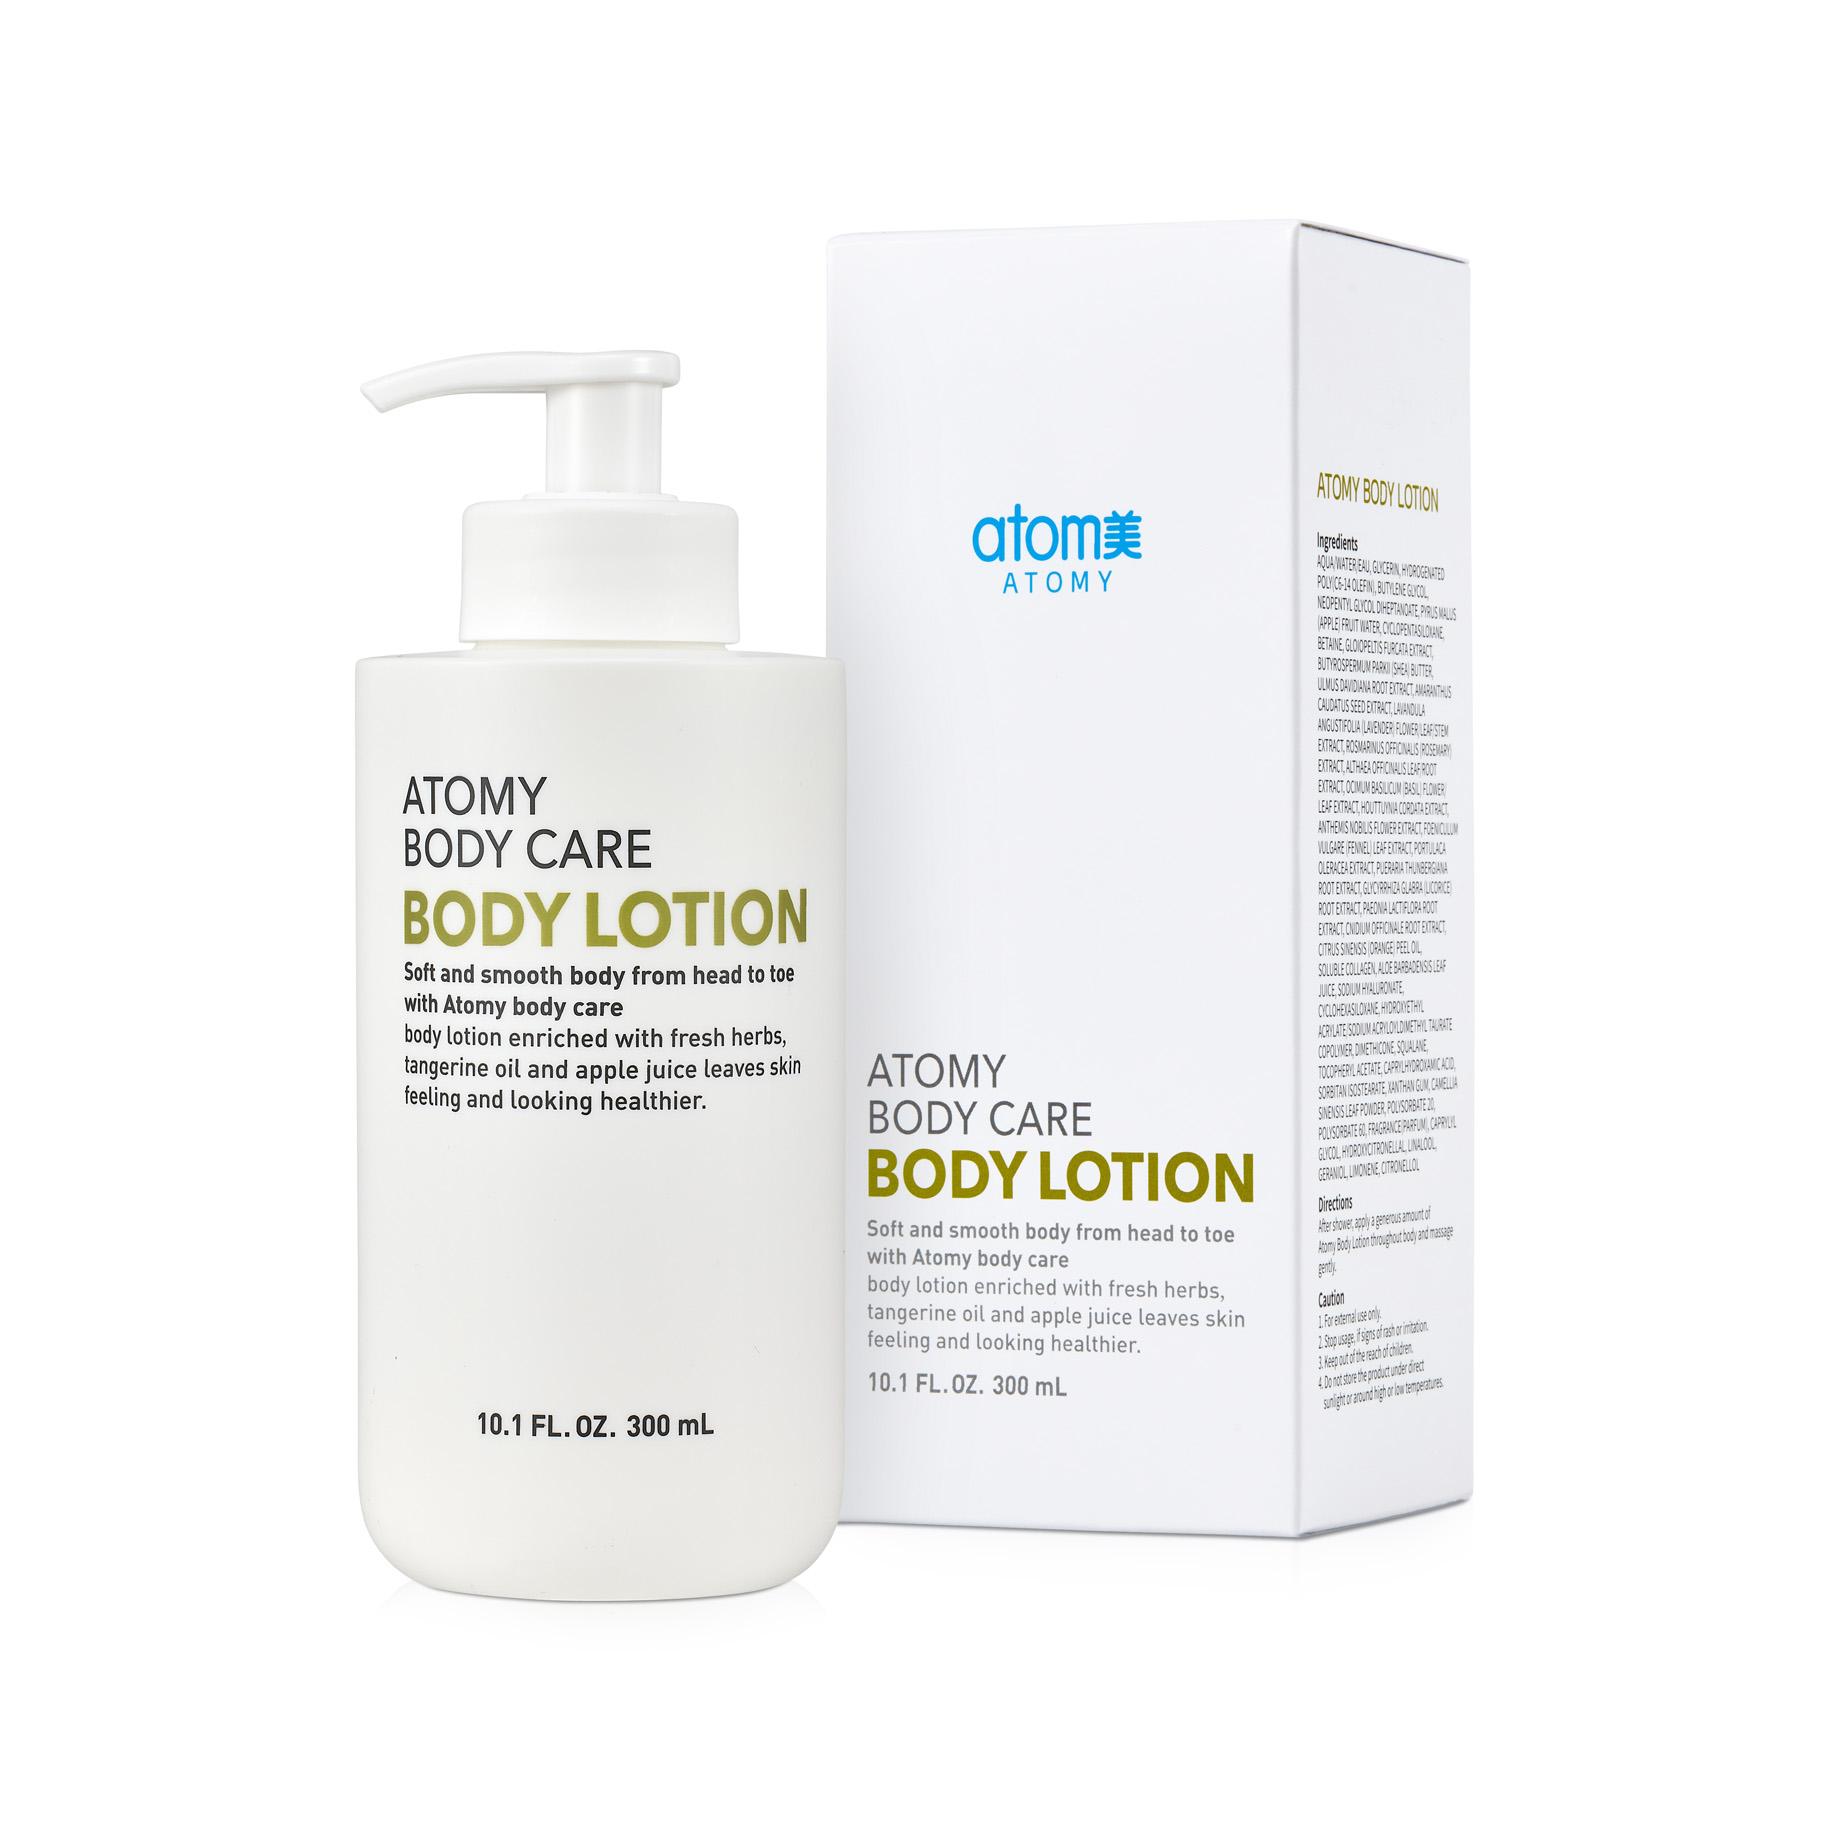 sua-duong-the-thao-duoc-atomy-body-care-body-lotion-300ml